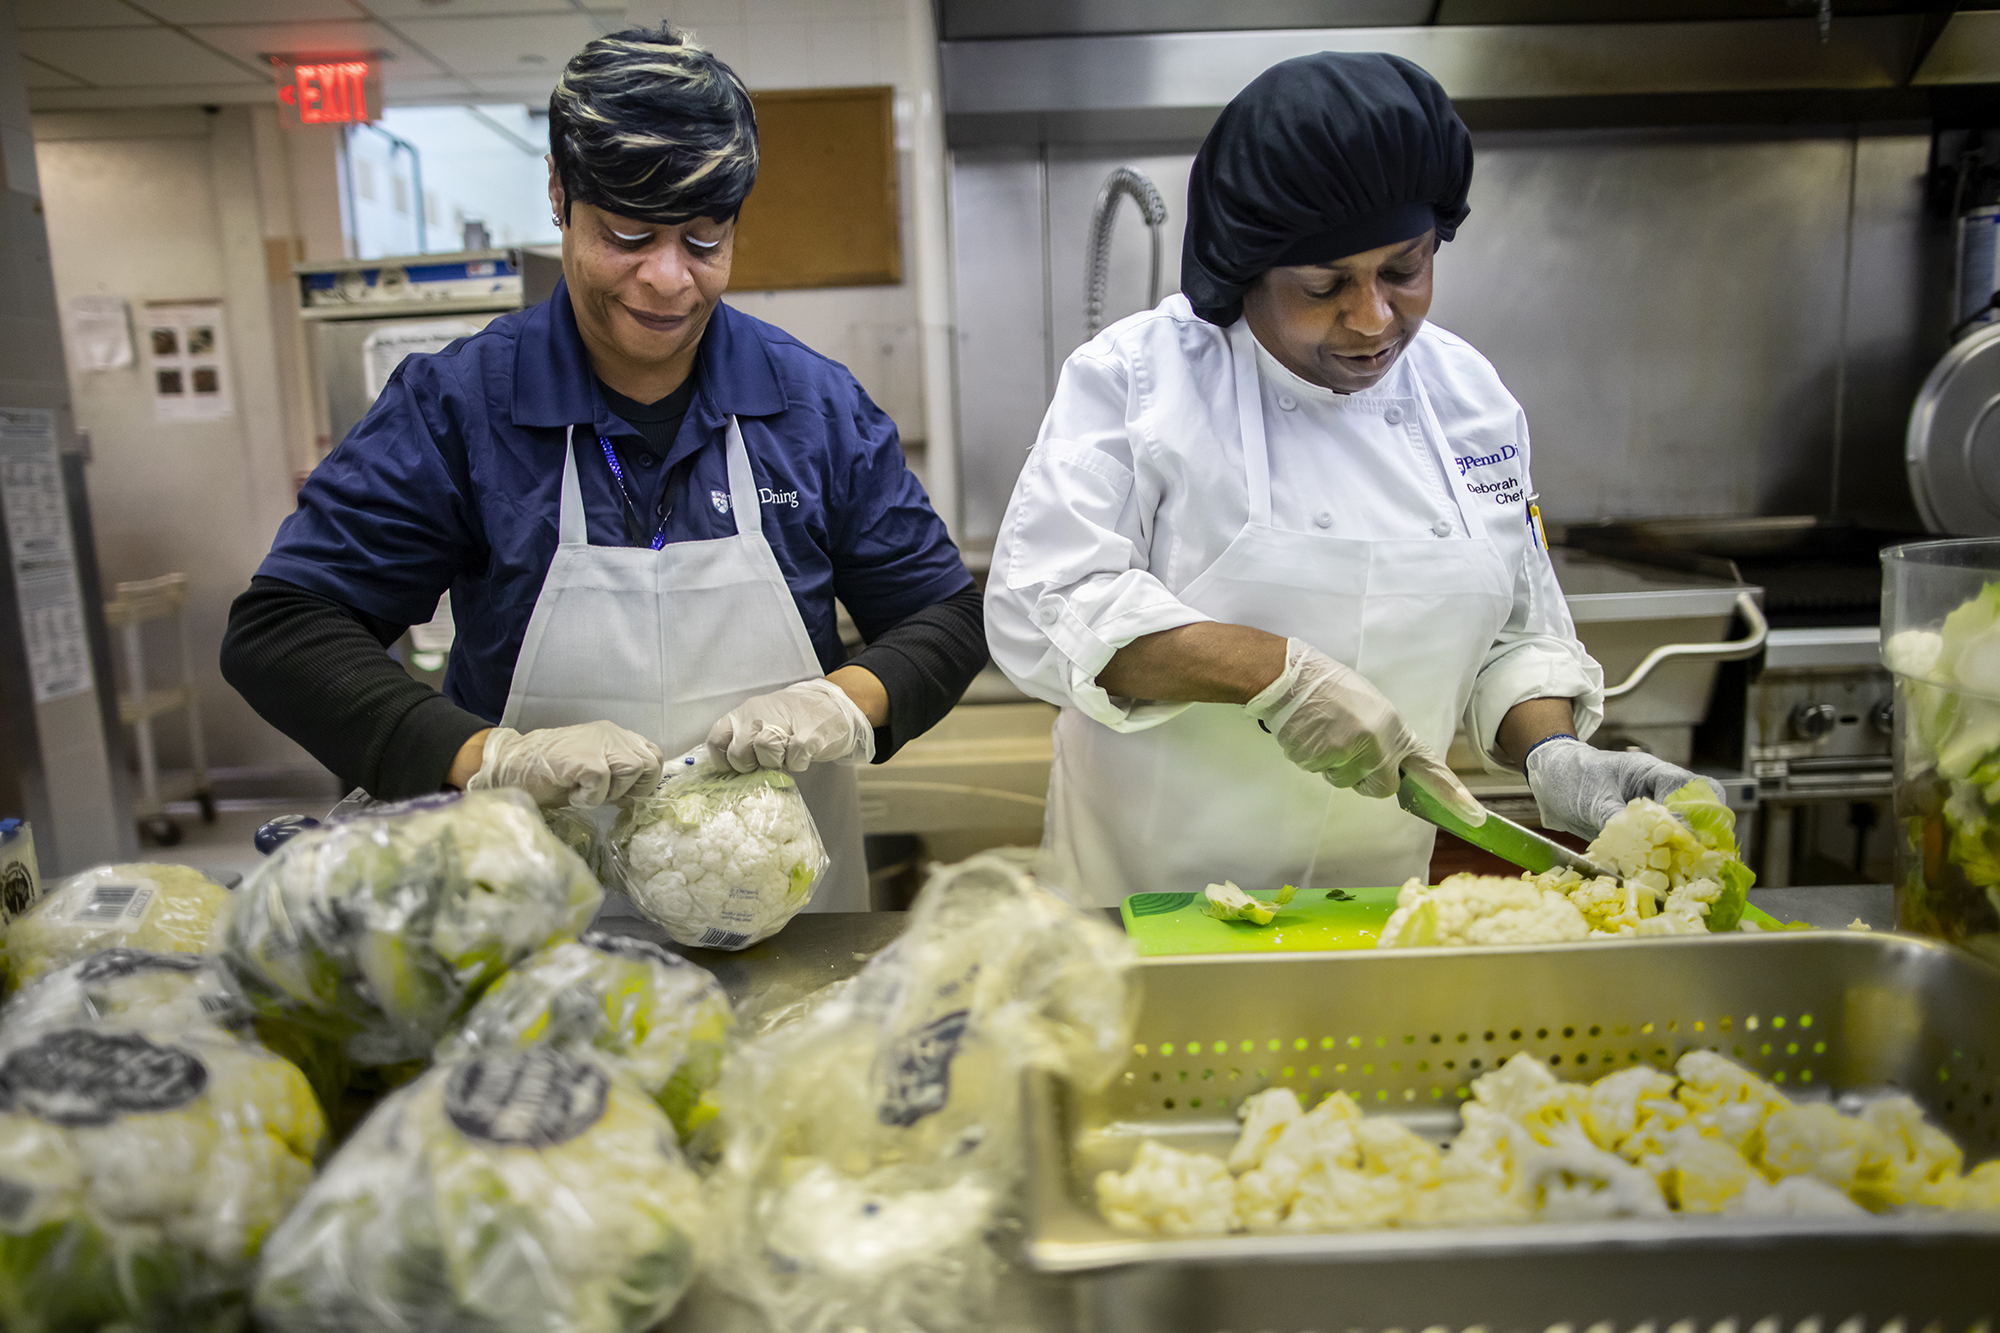 Chefs cutting bags of cauliflower in the kitchen of the dining hall at Penn.